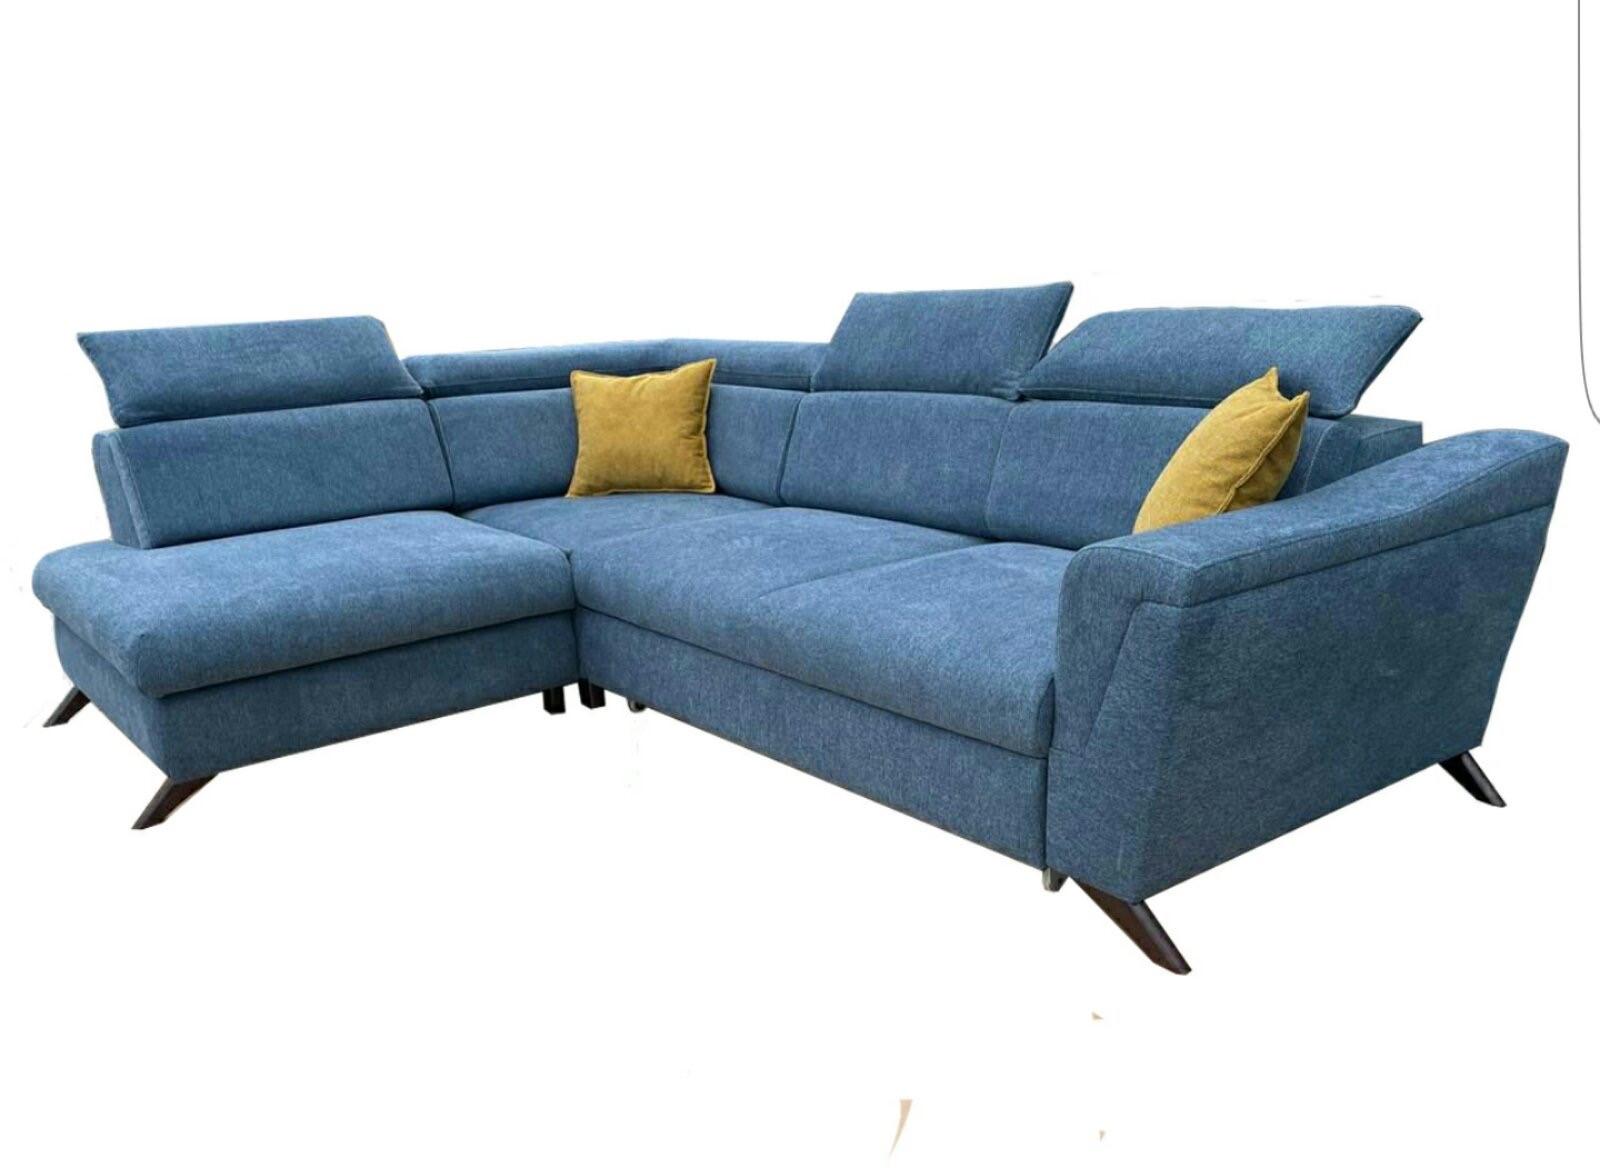 Contemporary, Modern Sectional Sofa GALASECTIONAL GALASECTIONAL in Blue Fabric